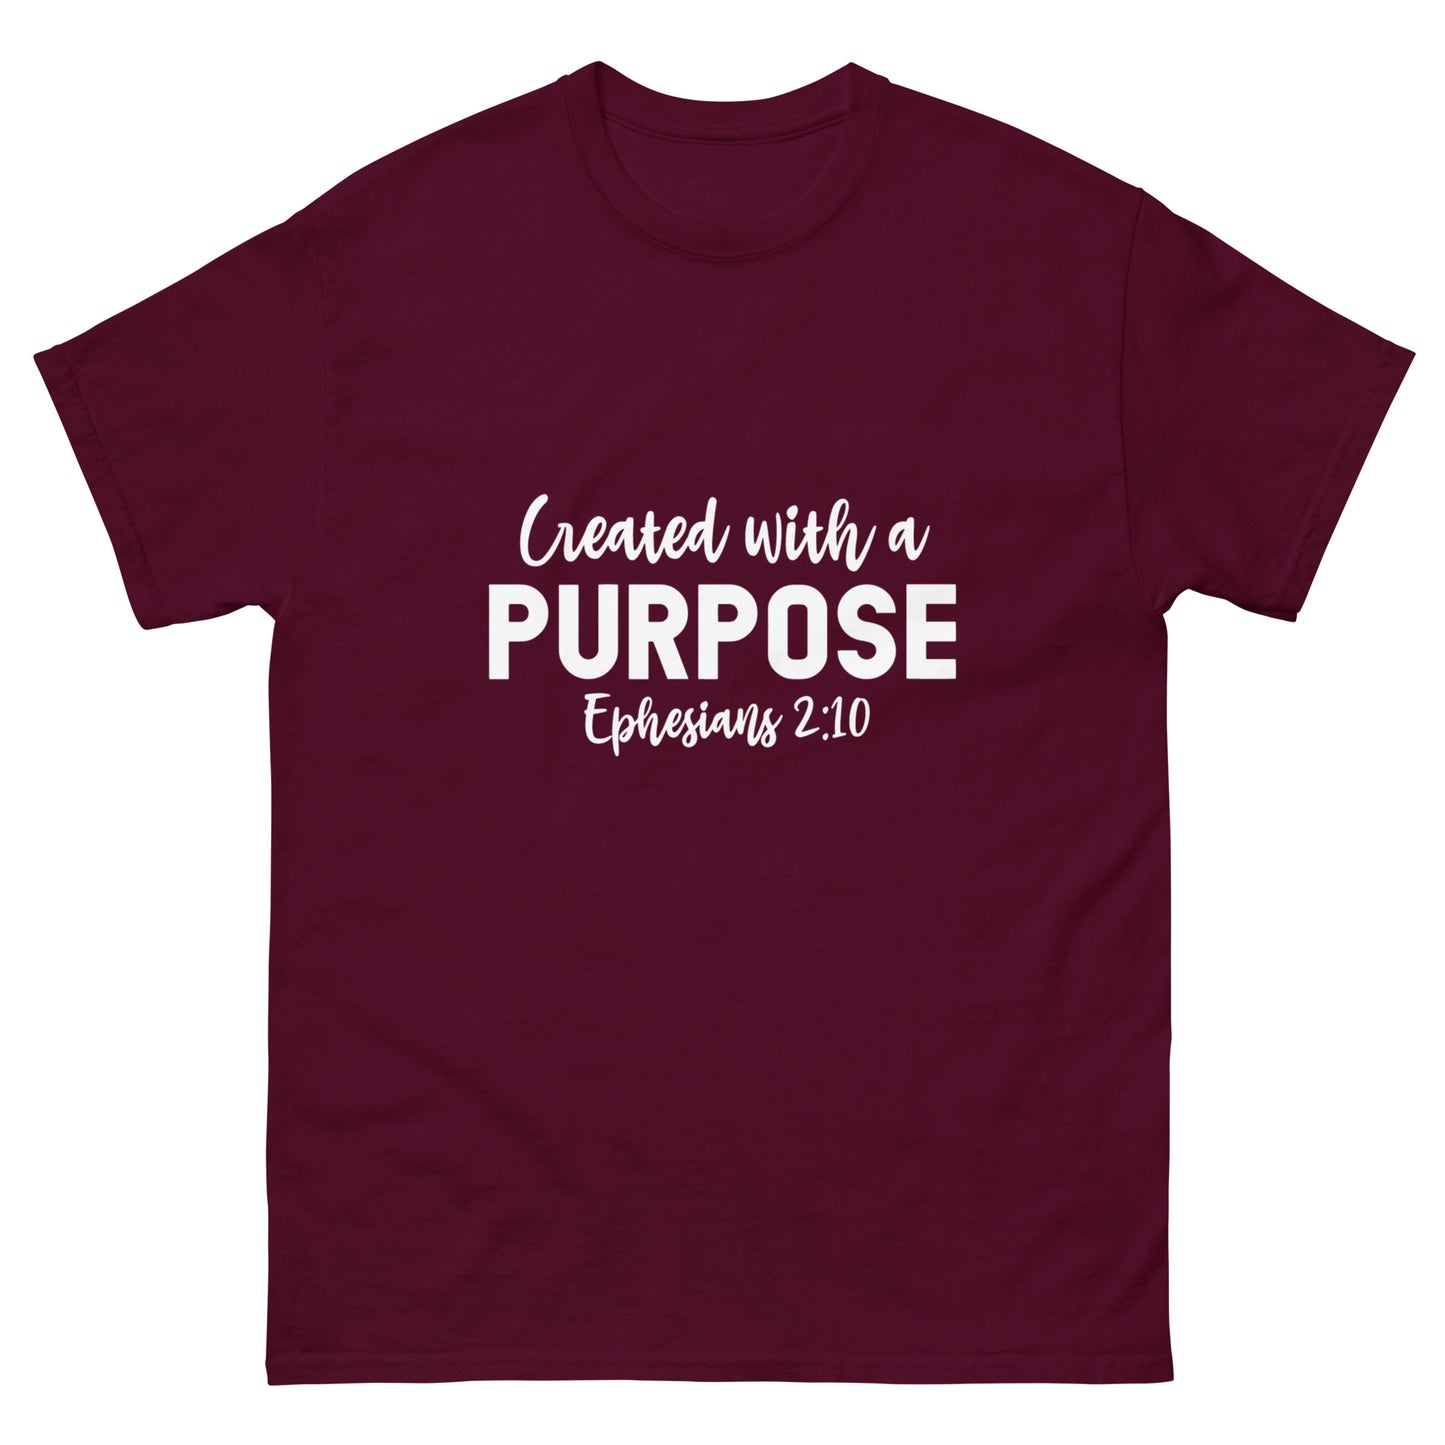 Created with a Purpose - classic tee